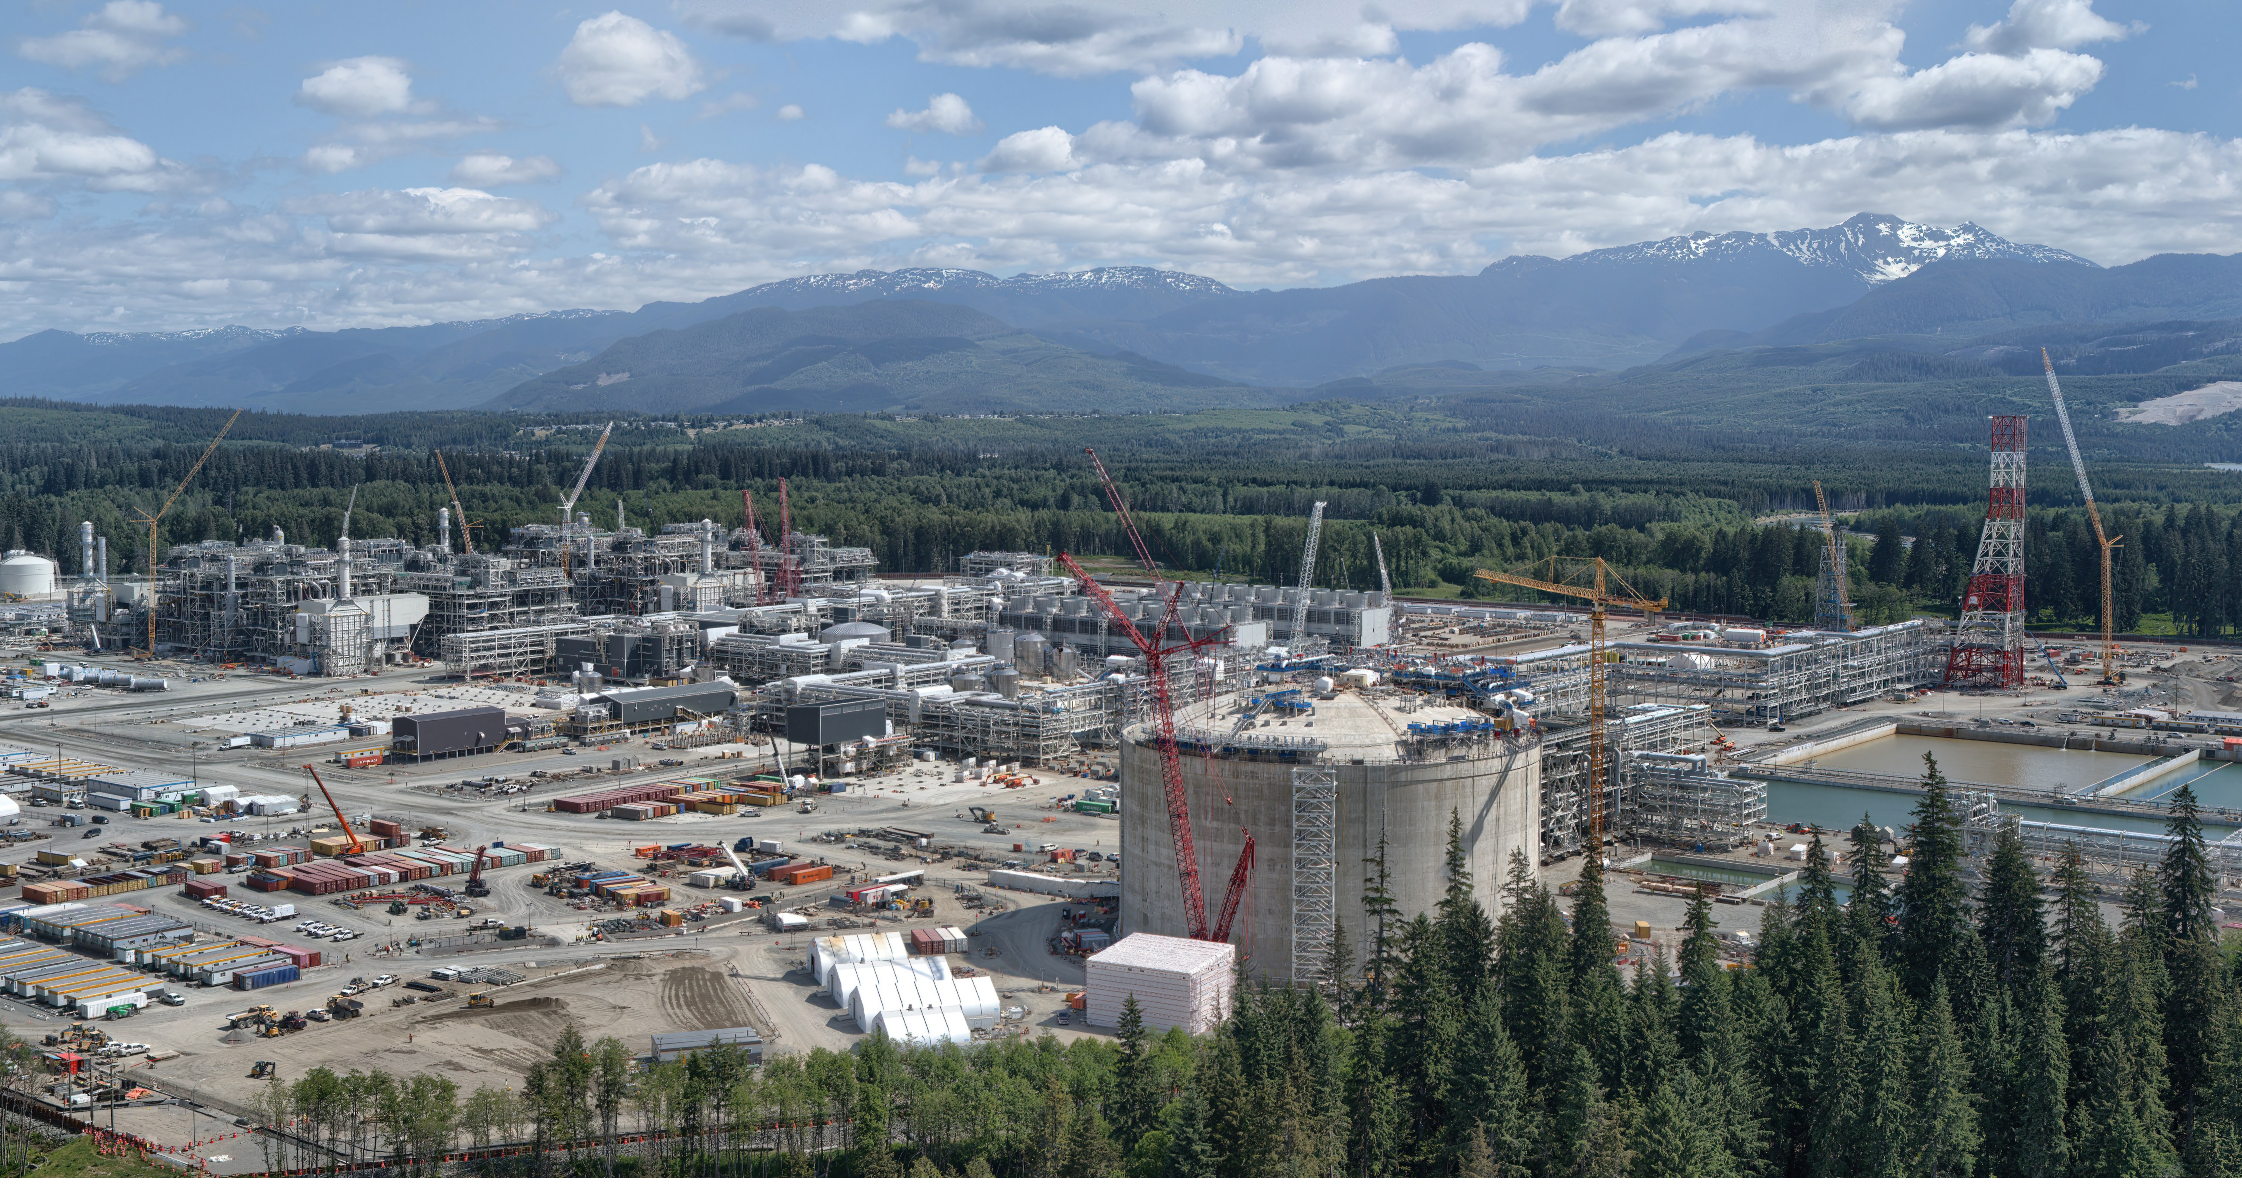 A view of the LNG Canada industrial site with construction equipment and facilities in Kitimat, British Columbia